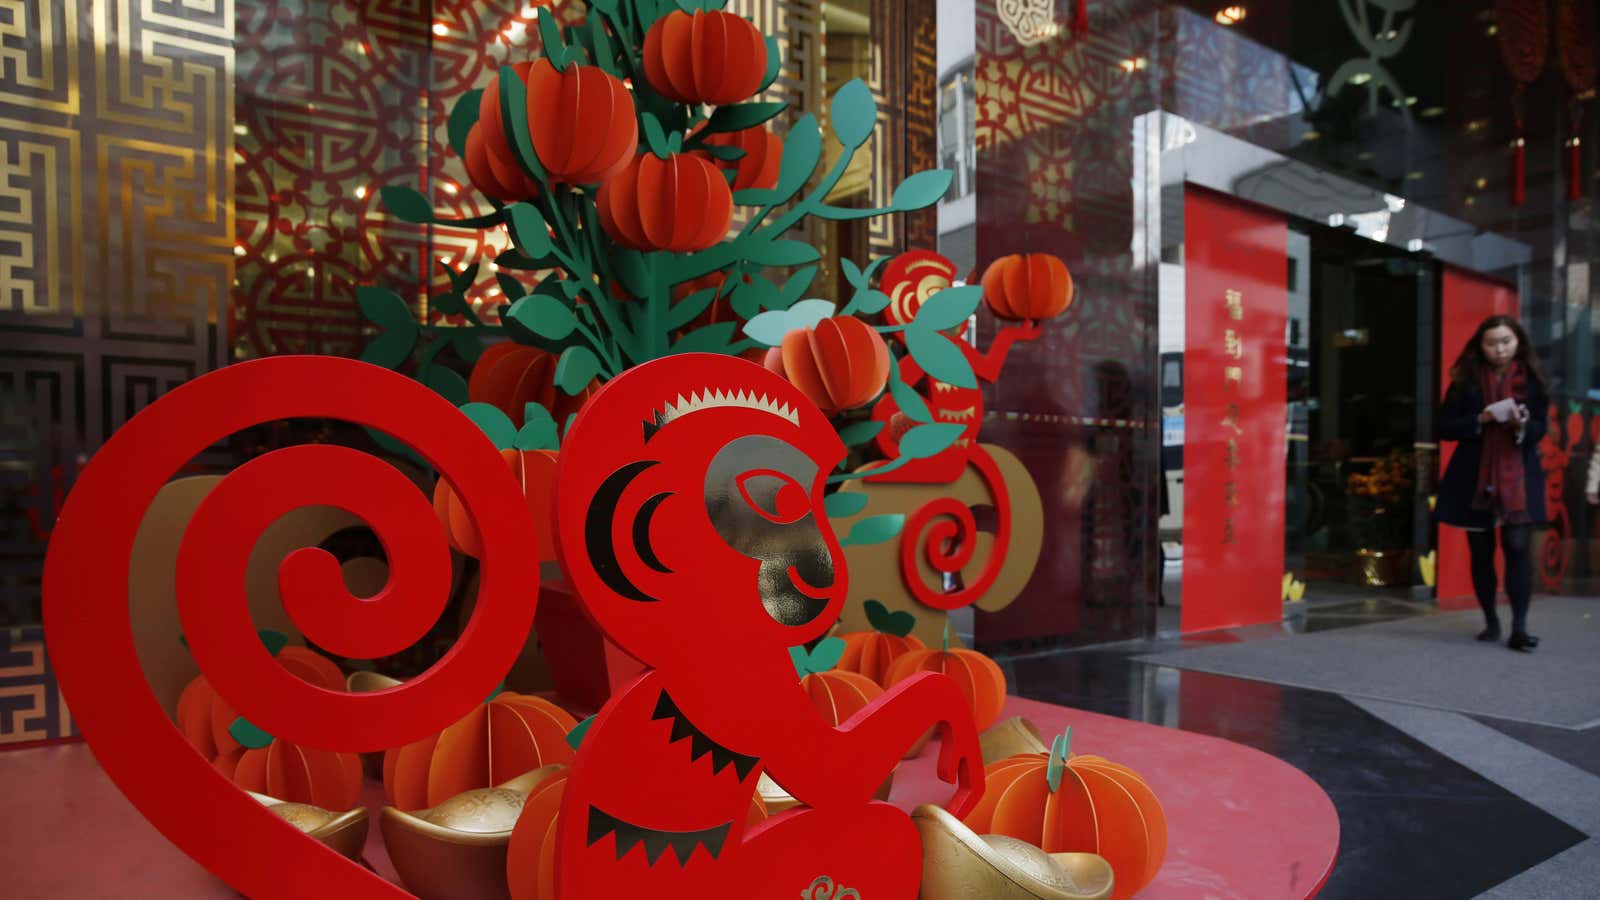 Bank decorations in Hong Kong for Monkey Year, which starts on Feb. 8.